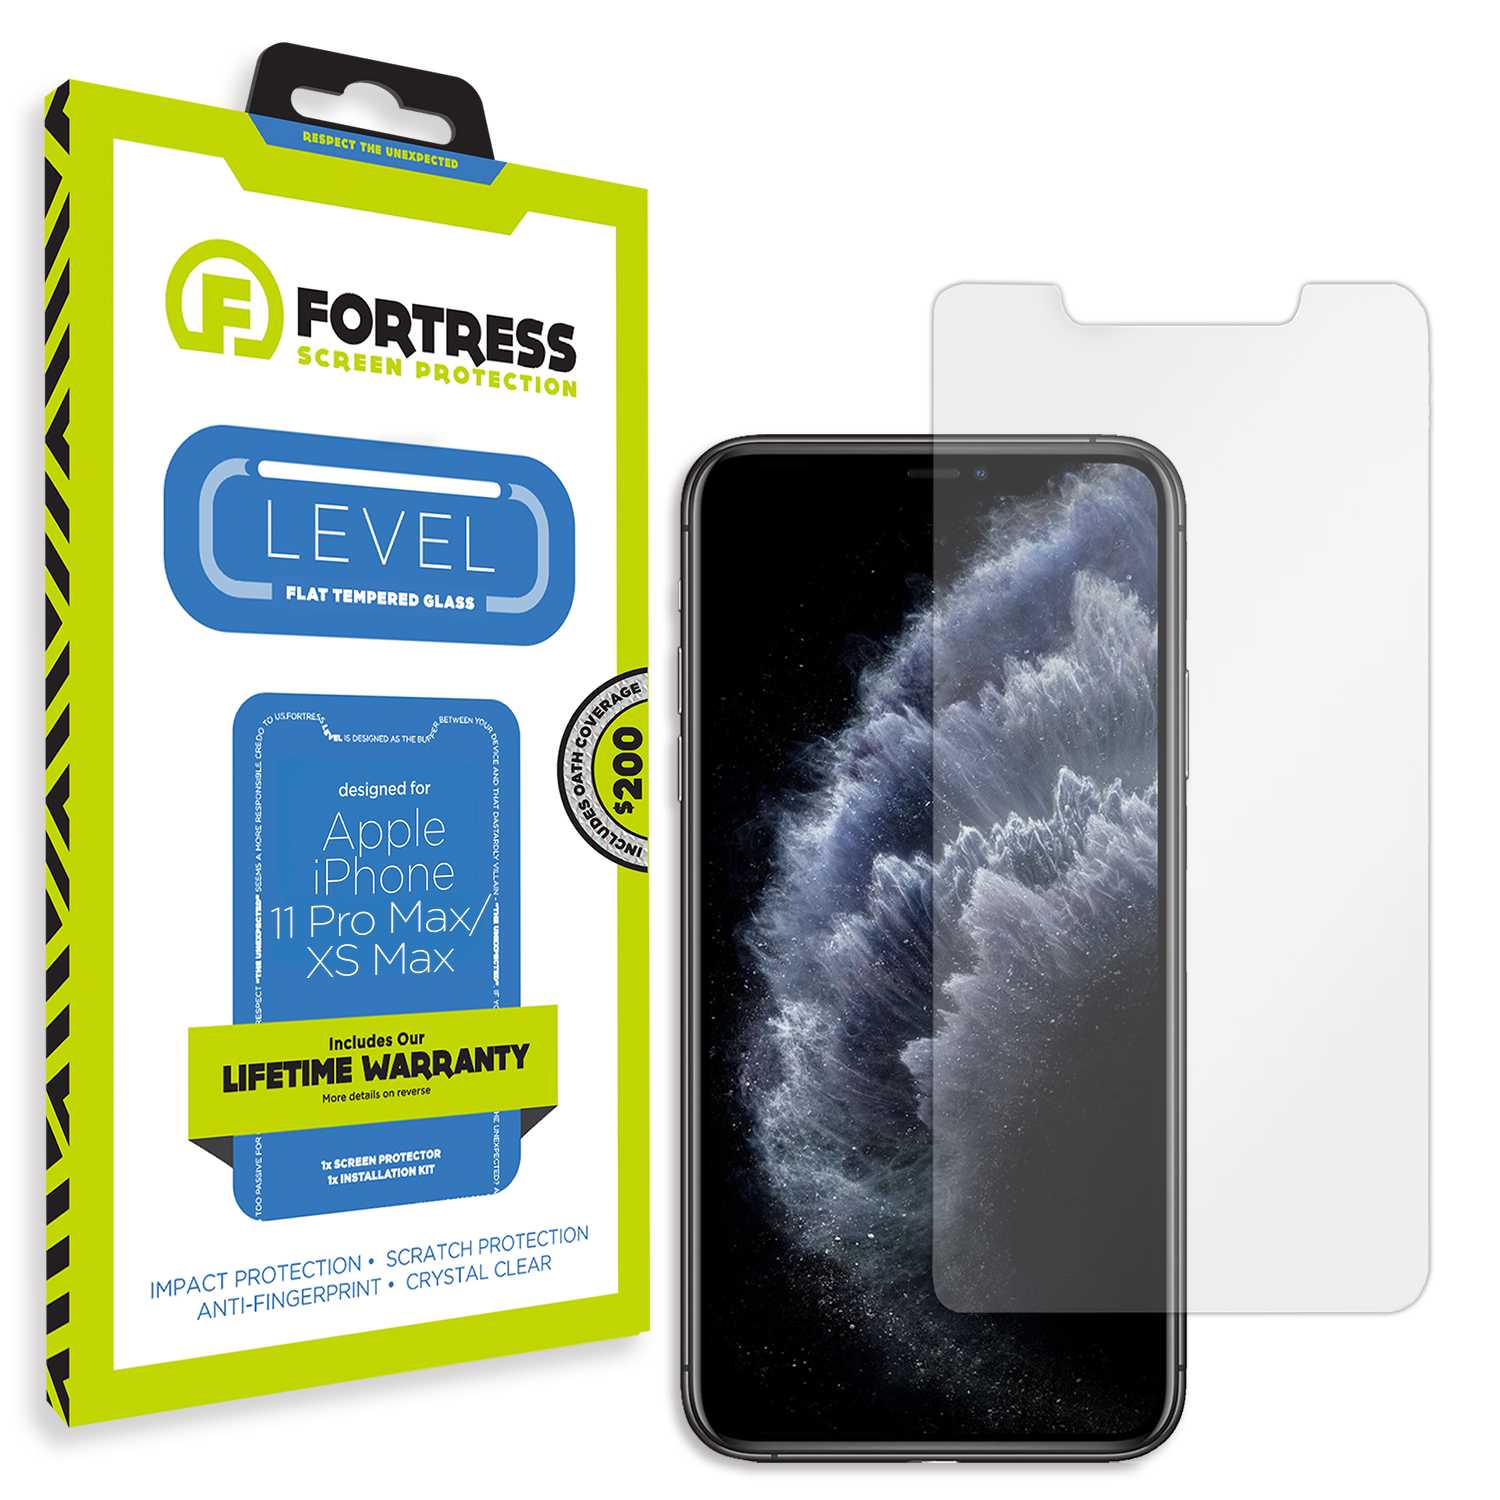 Fortress iPhone XS Max Screen Protector $200Coverage Scooch Screen Protector